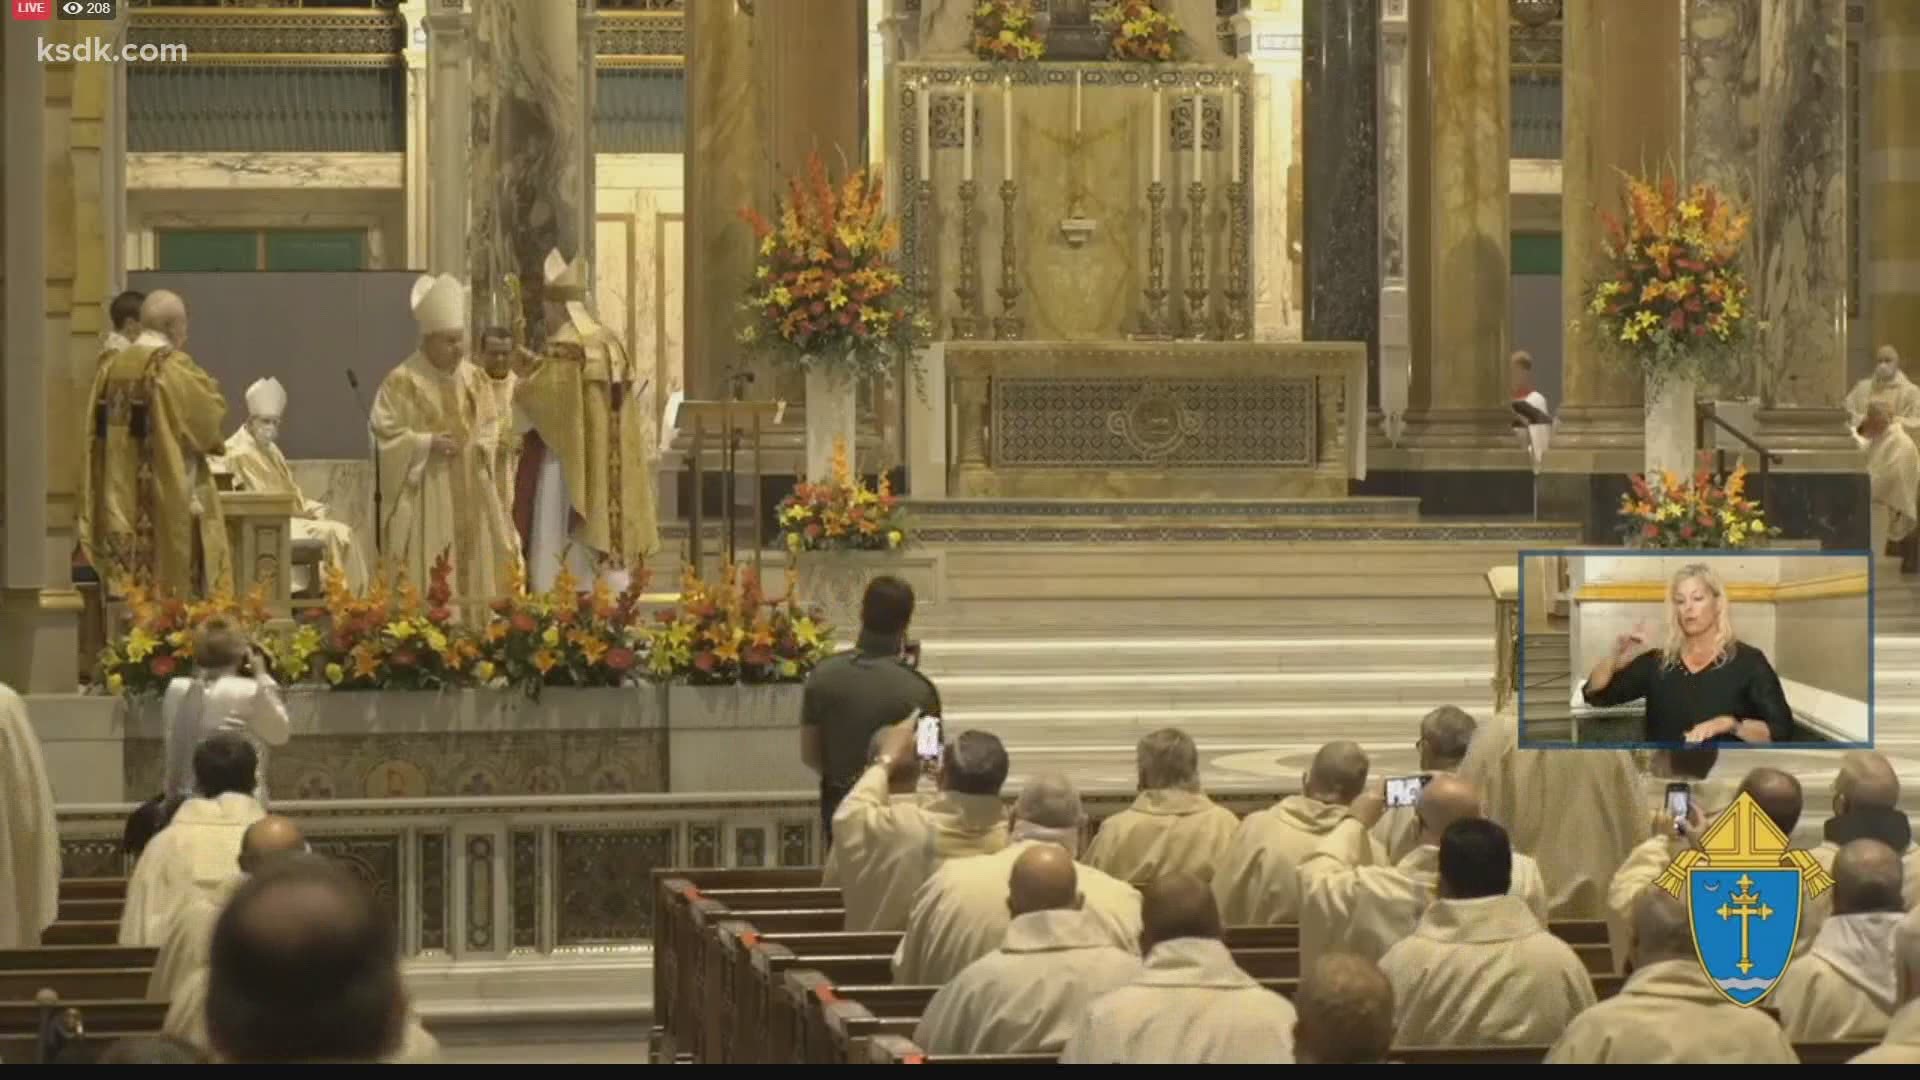 Archdiocese of St. Louis installs new archbishop | 0